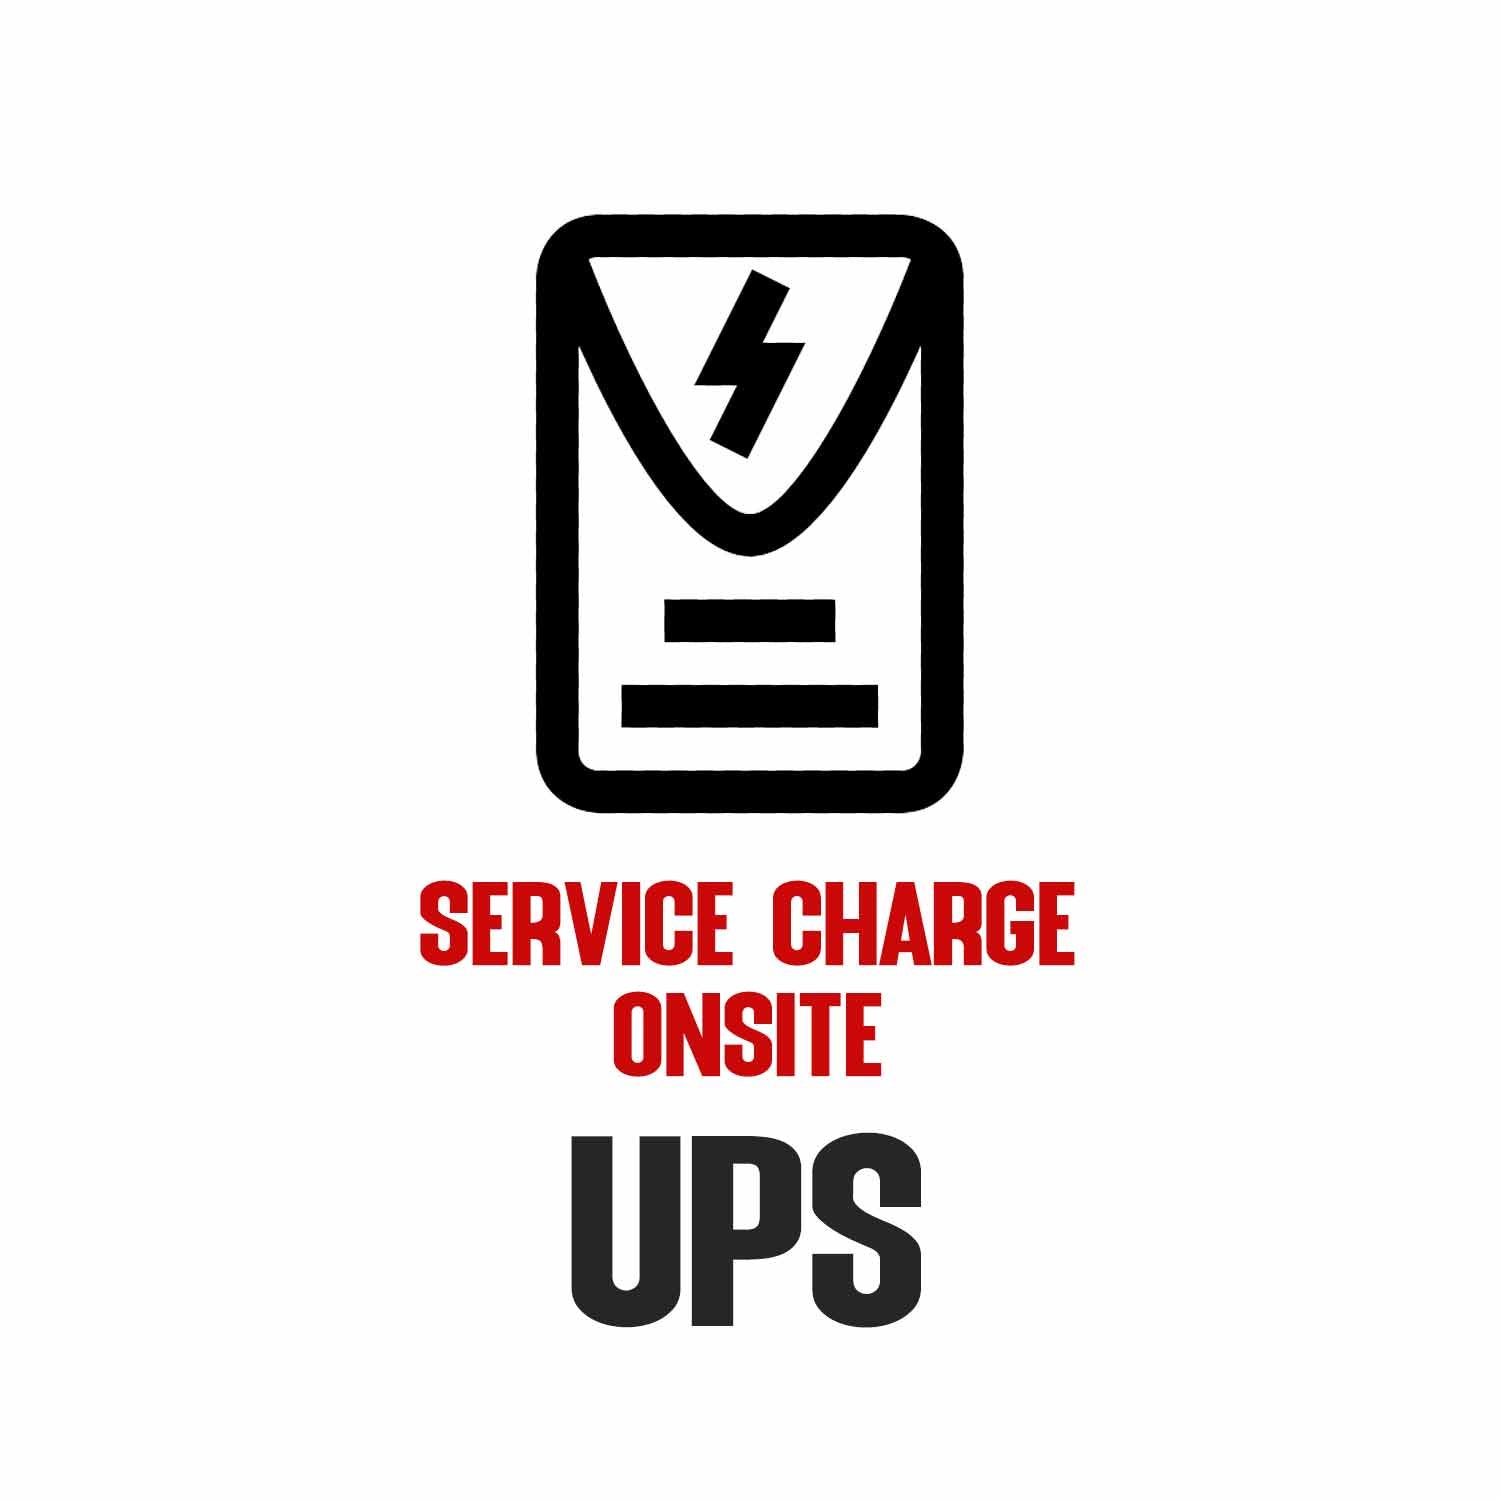 Service Charge Onsite - UPS